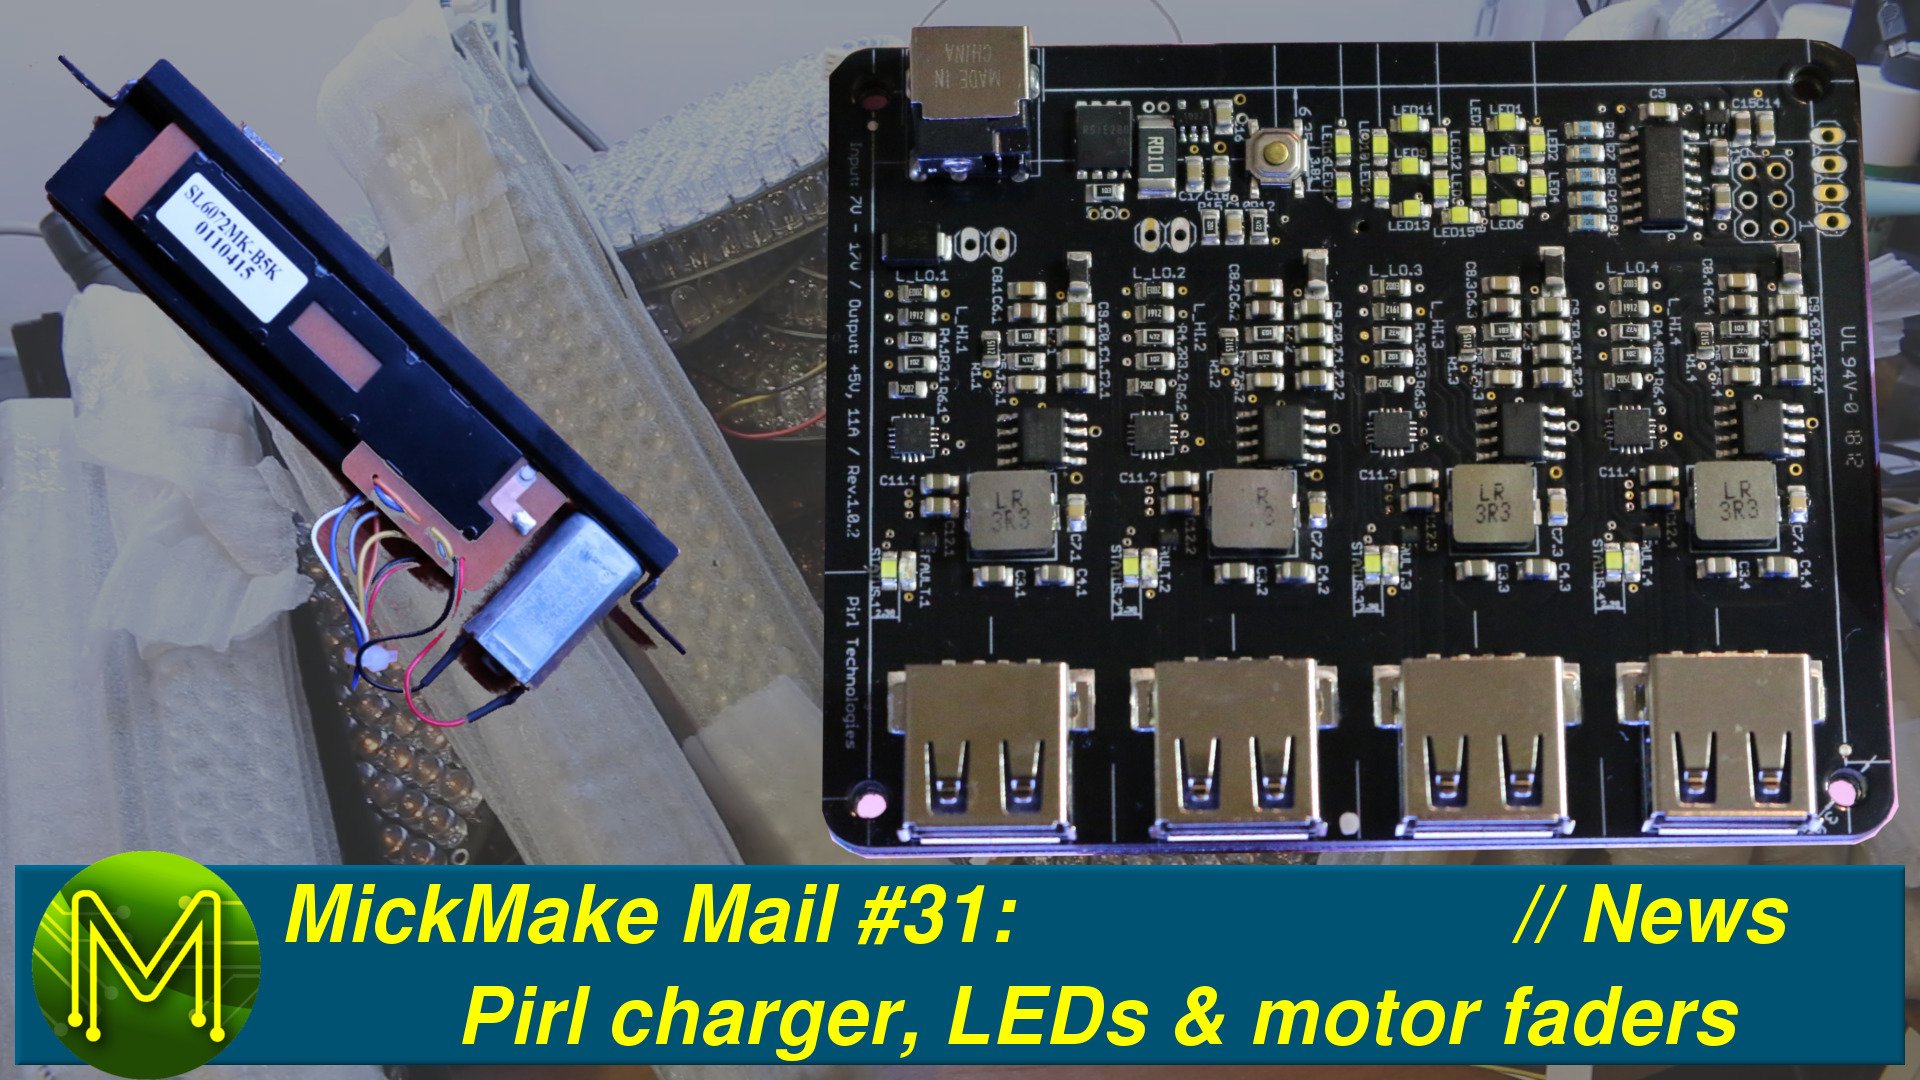 MickMake Mail #31: Pirl charger, LEDs & motor faders // News